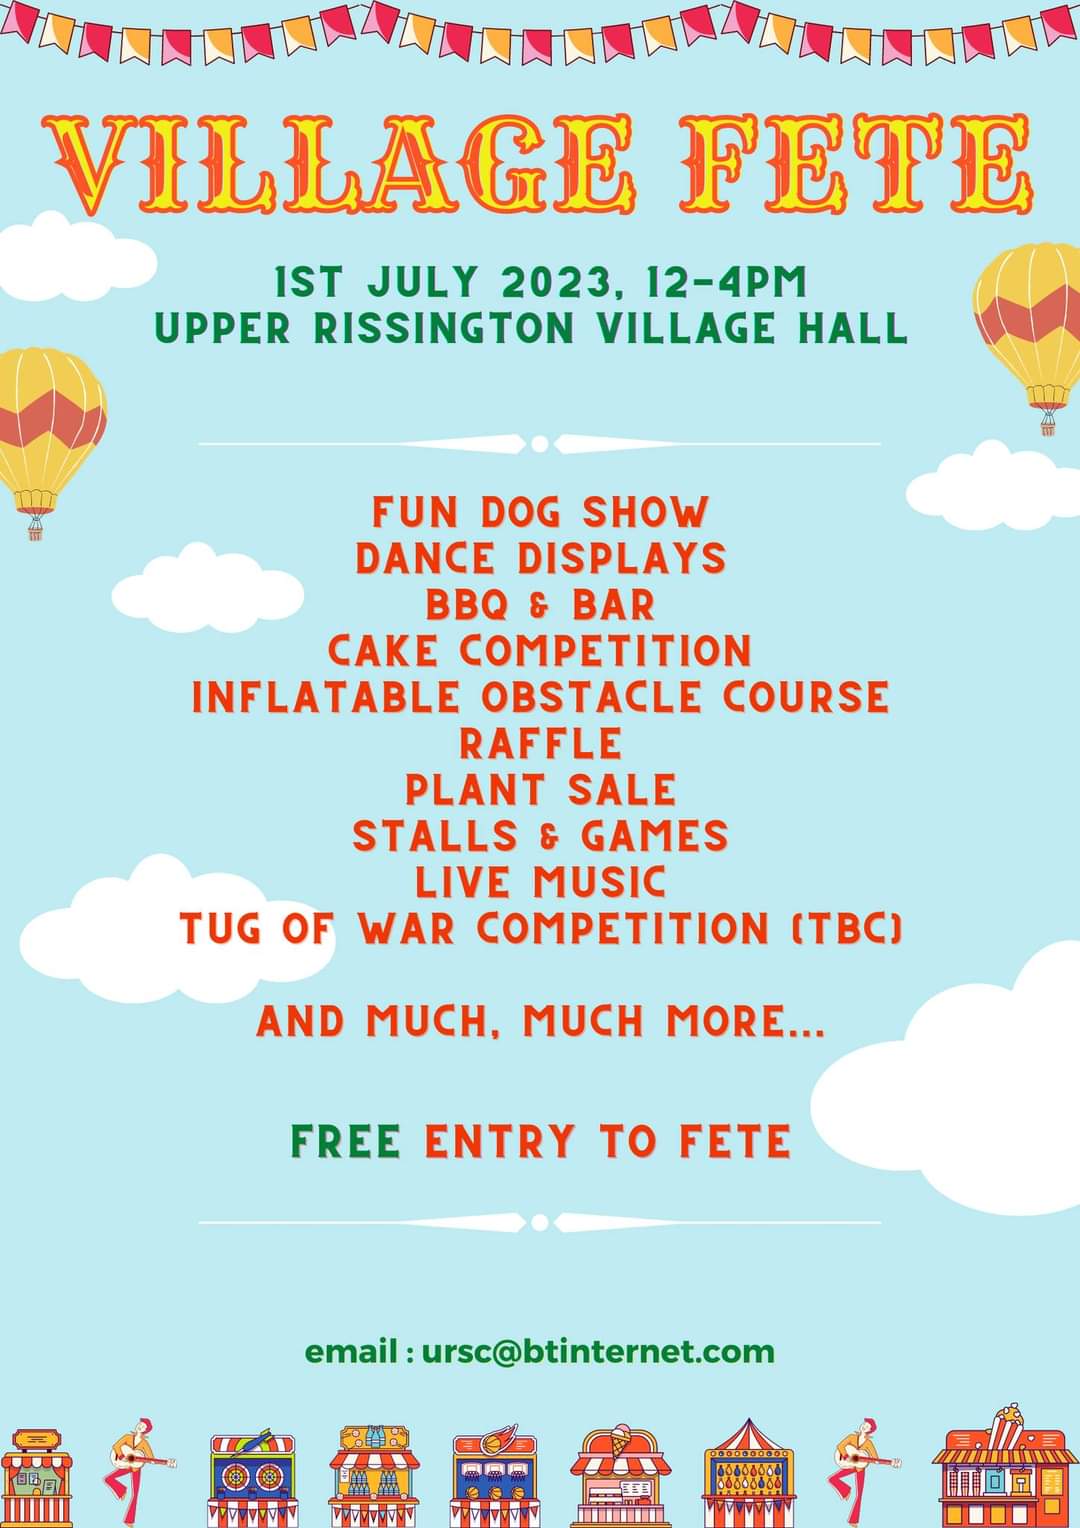 Poster advertising the Summer Fete